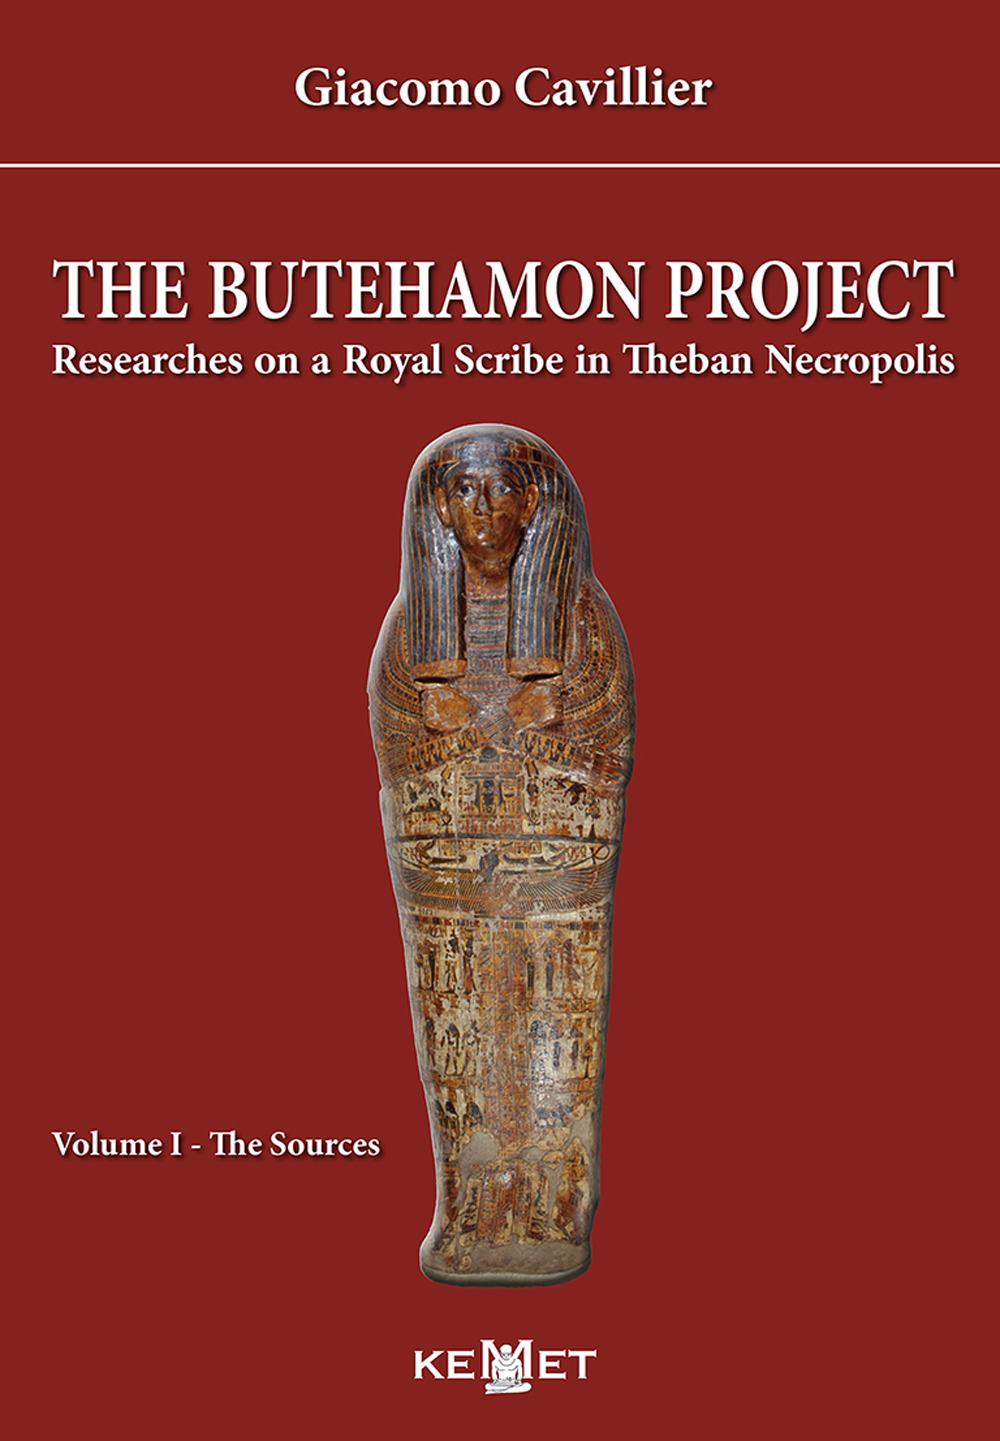 The Butehamon project. Researches on a Royal Scribe in Theban Necropolis. Vol. 1: The sources